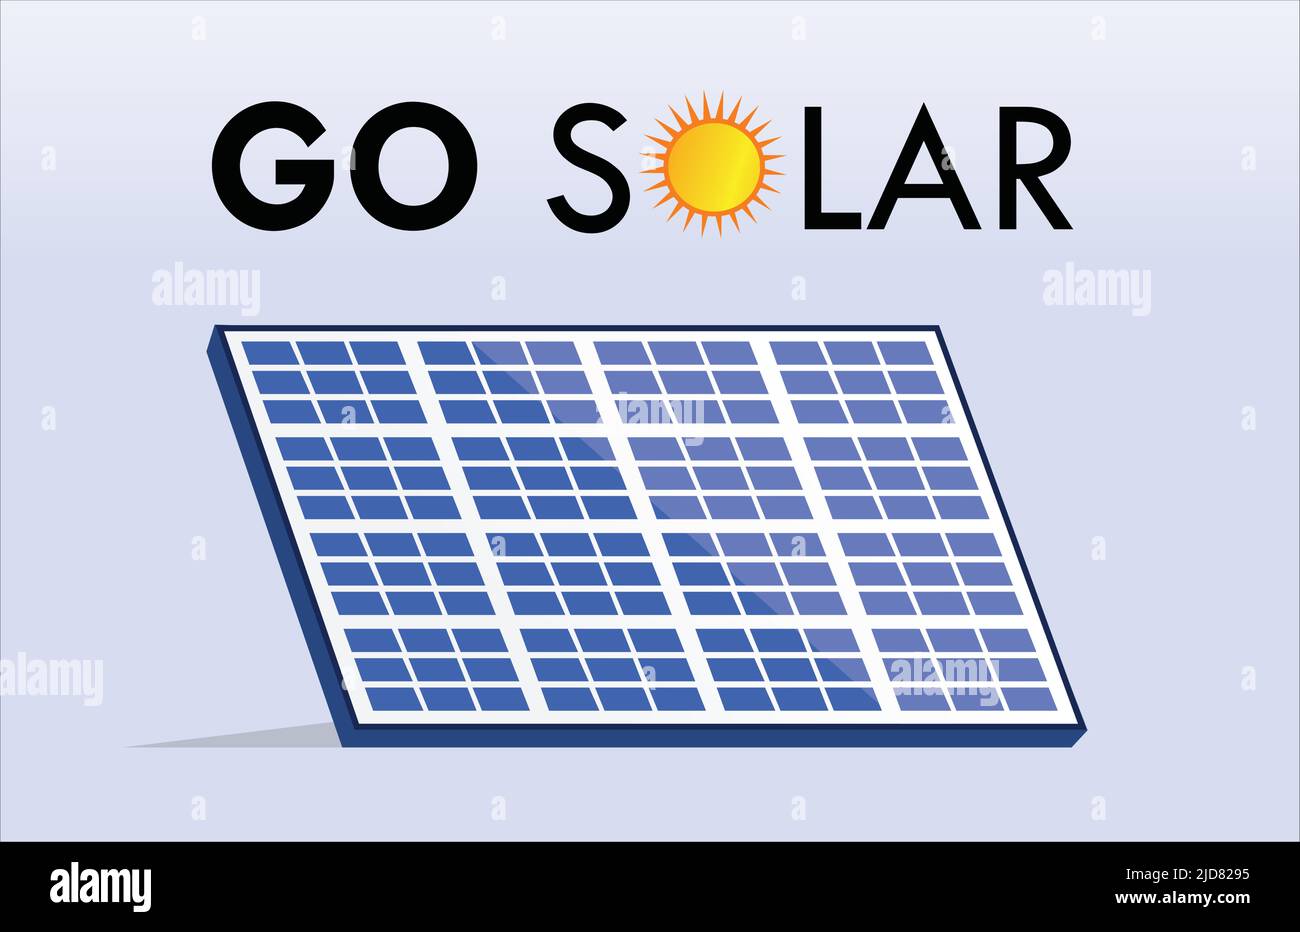 Go Solar Graphic Illustration for Solar Panel Clean Electricity Green Renewable Sustainable Energy Self awareness innovative Infografica Environment Illustrazione Vettoriale